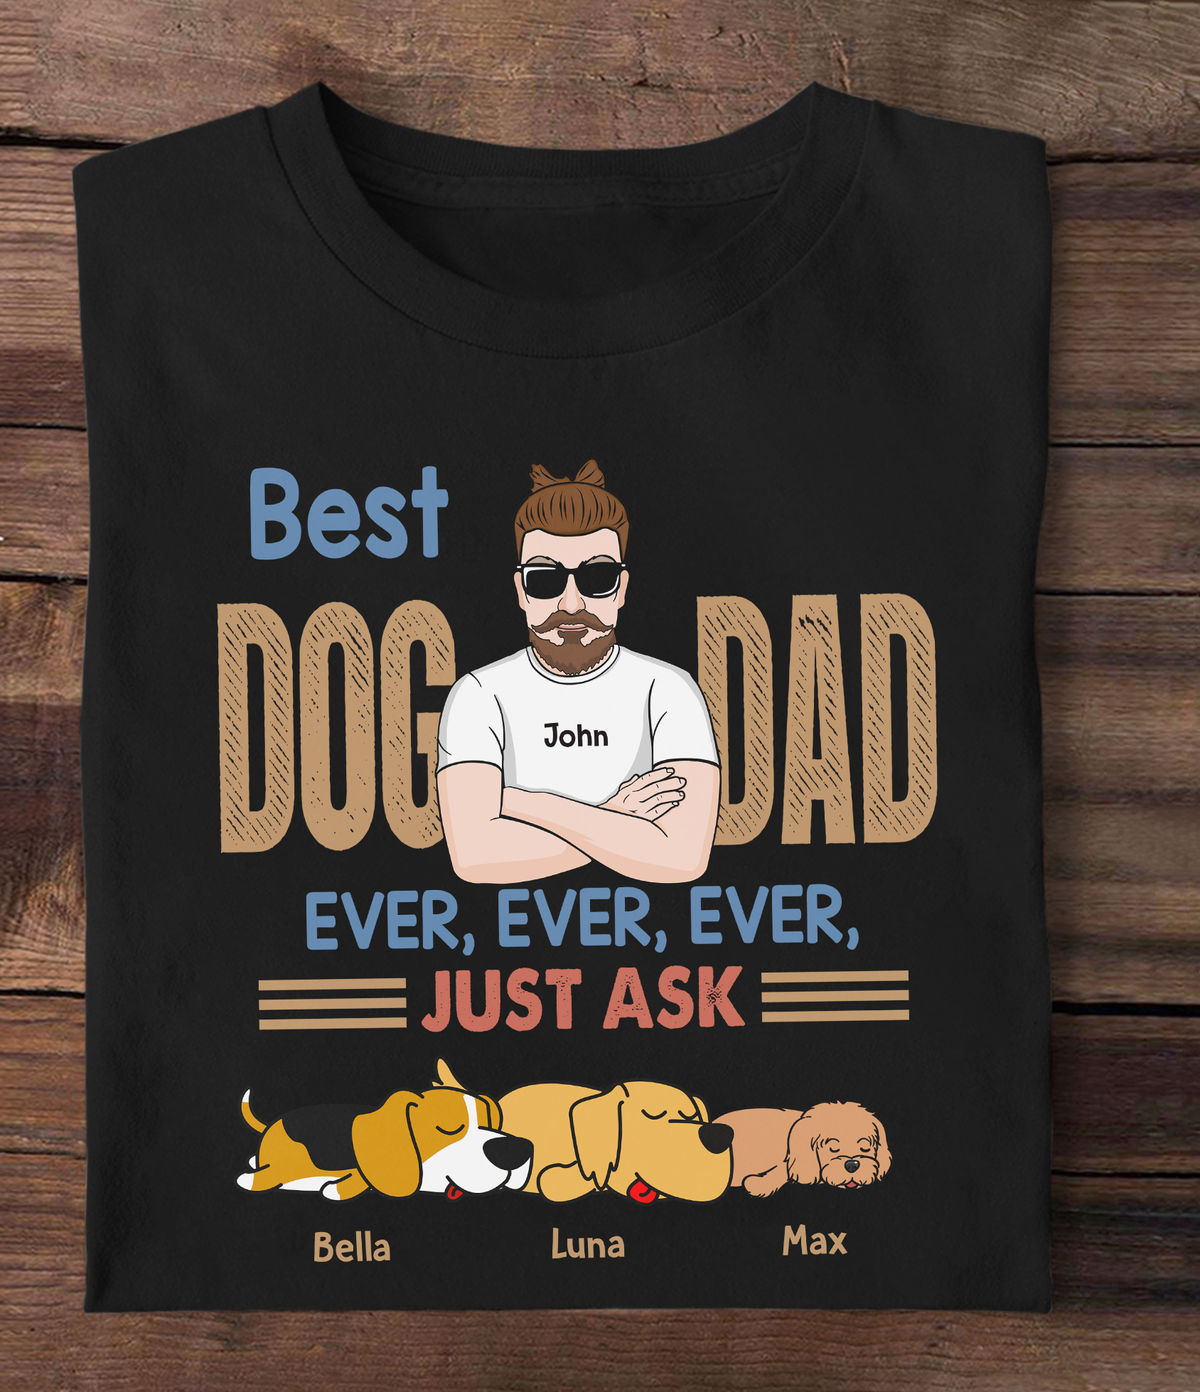 Dog Dad Shirt - Best Dog Dad Ever Ever Ever Just Ask - Father's Day Gift, Gifts For Dad, Dog Lover Gift - Personalized Shirt